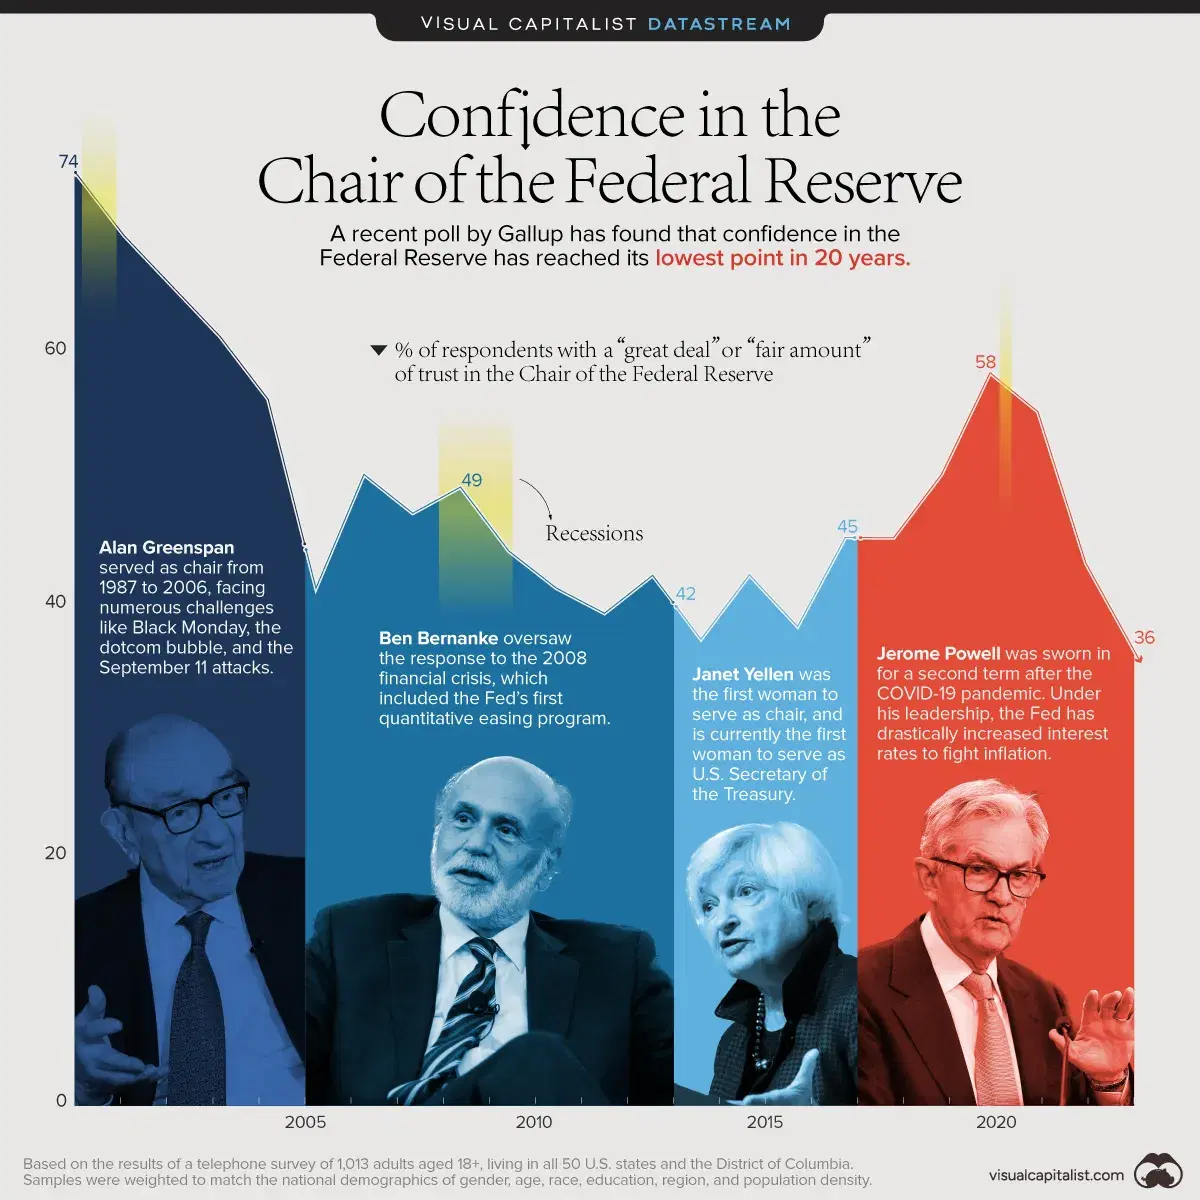 Public Trust in the Federal Reserve